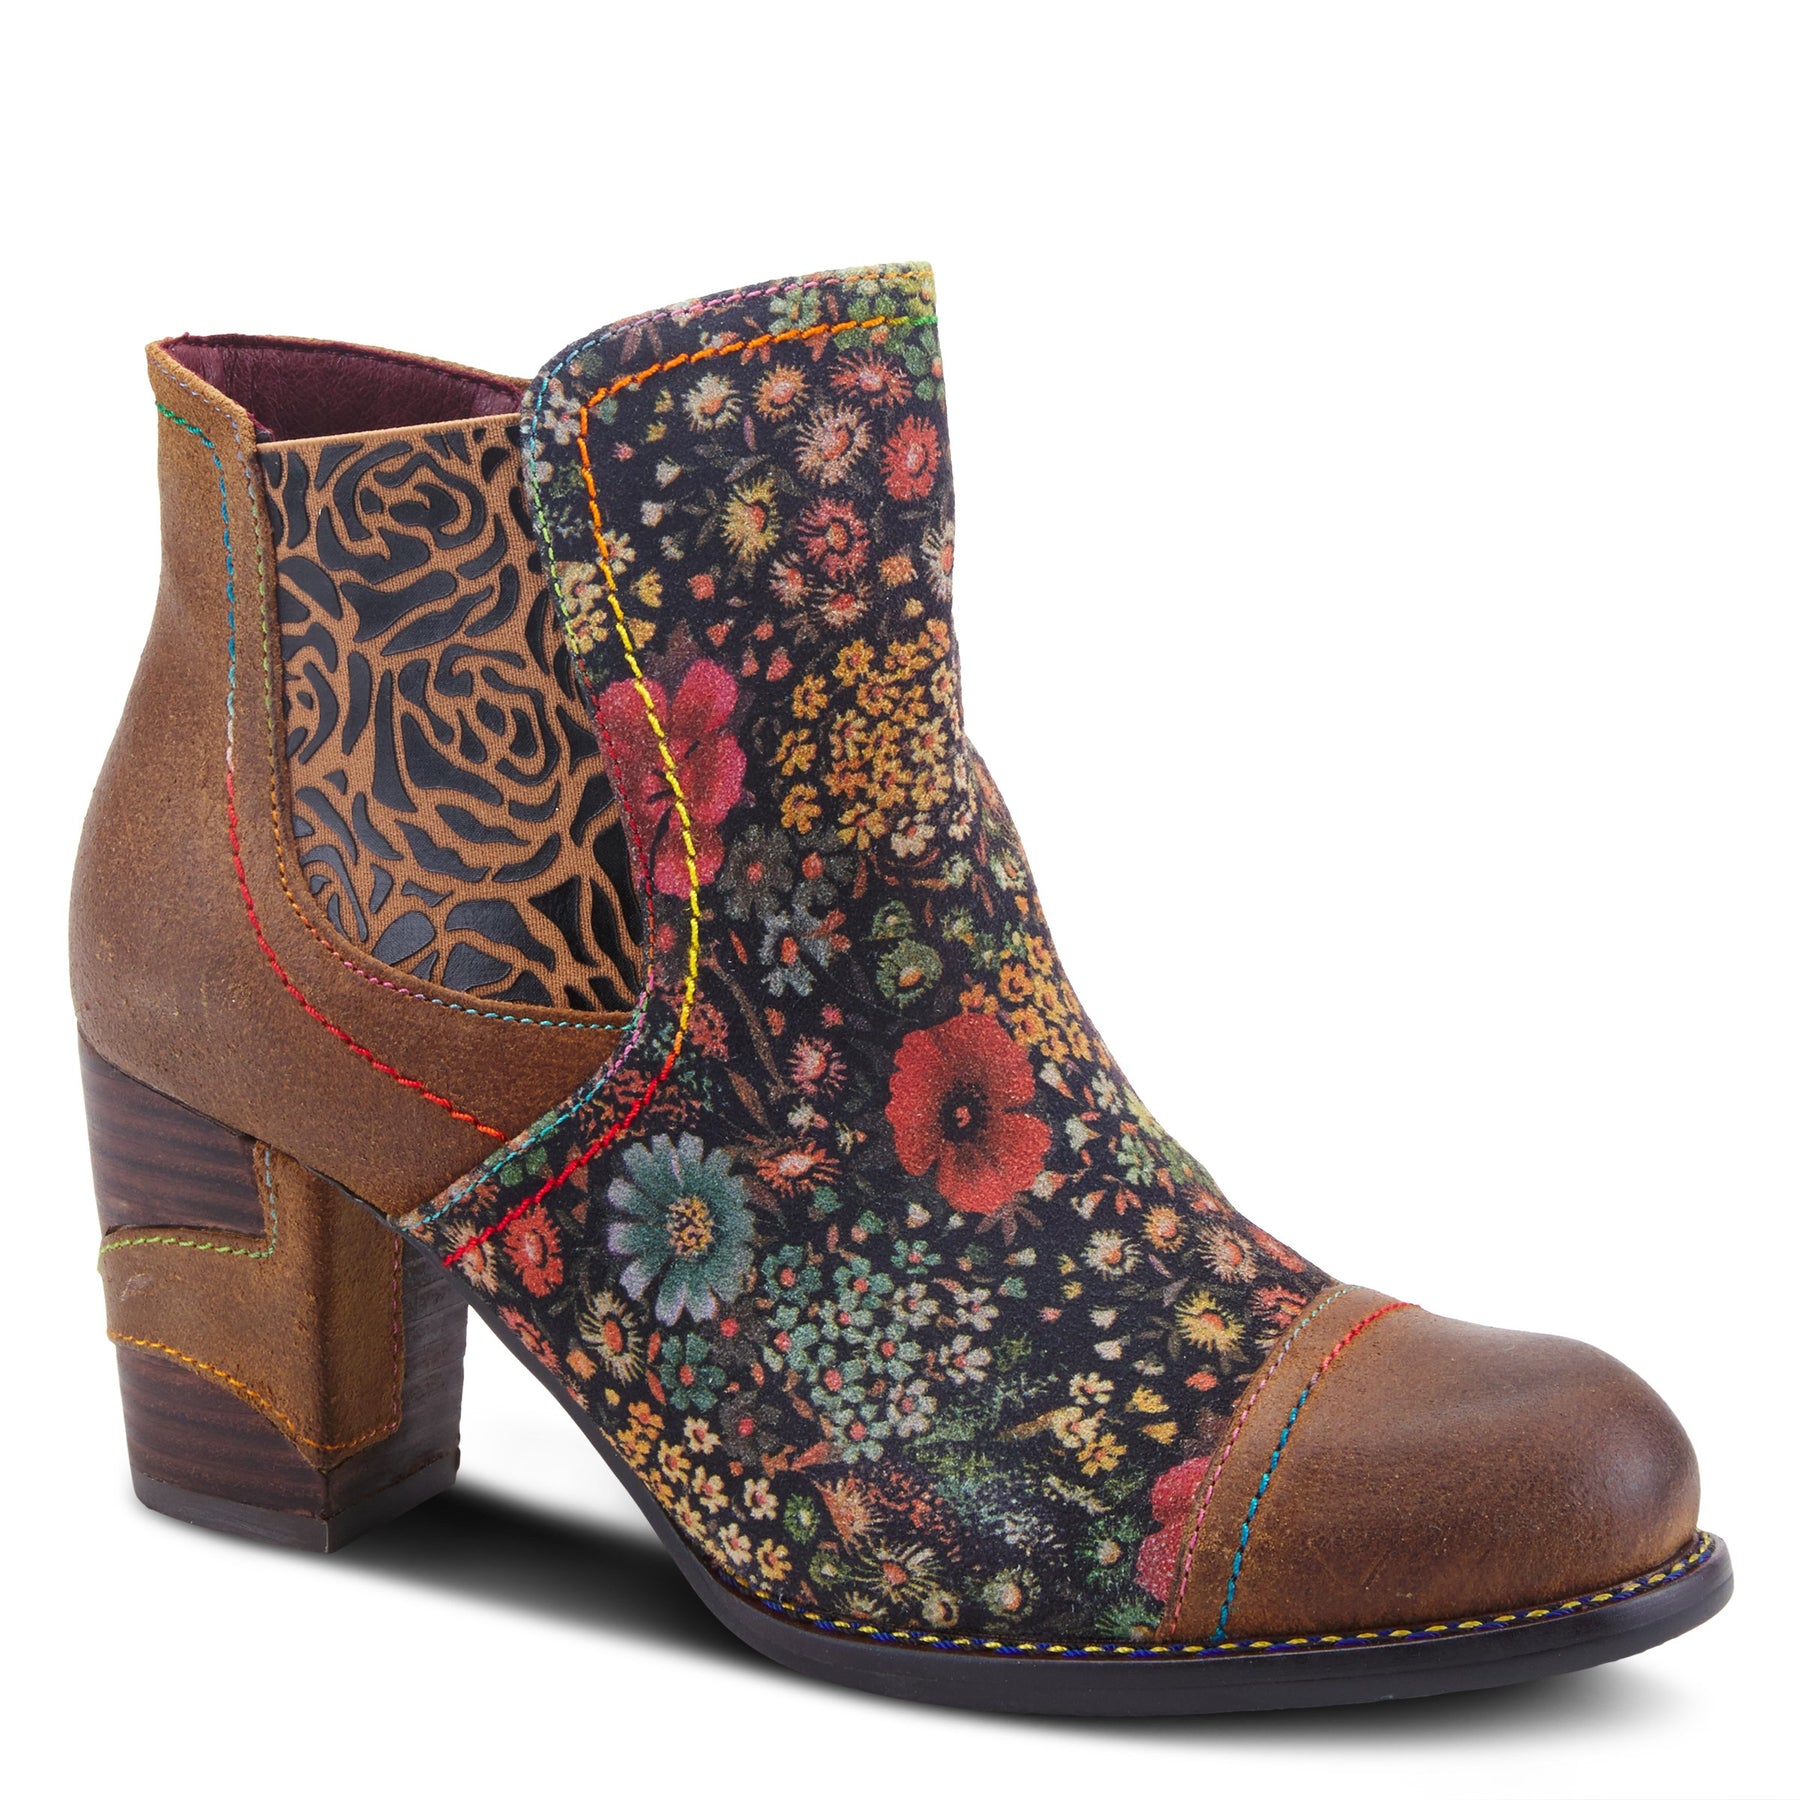 MELVINA BOOTIE by L'ARTISTE – Spring Step Shoes